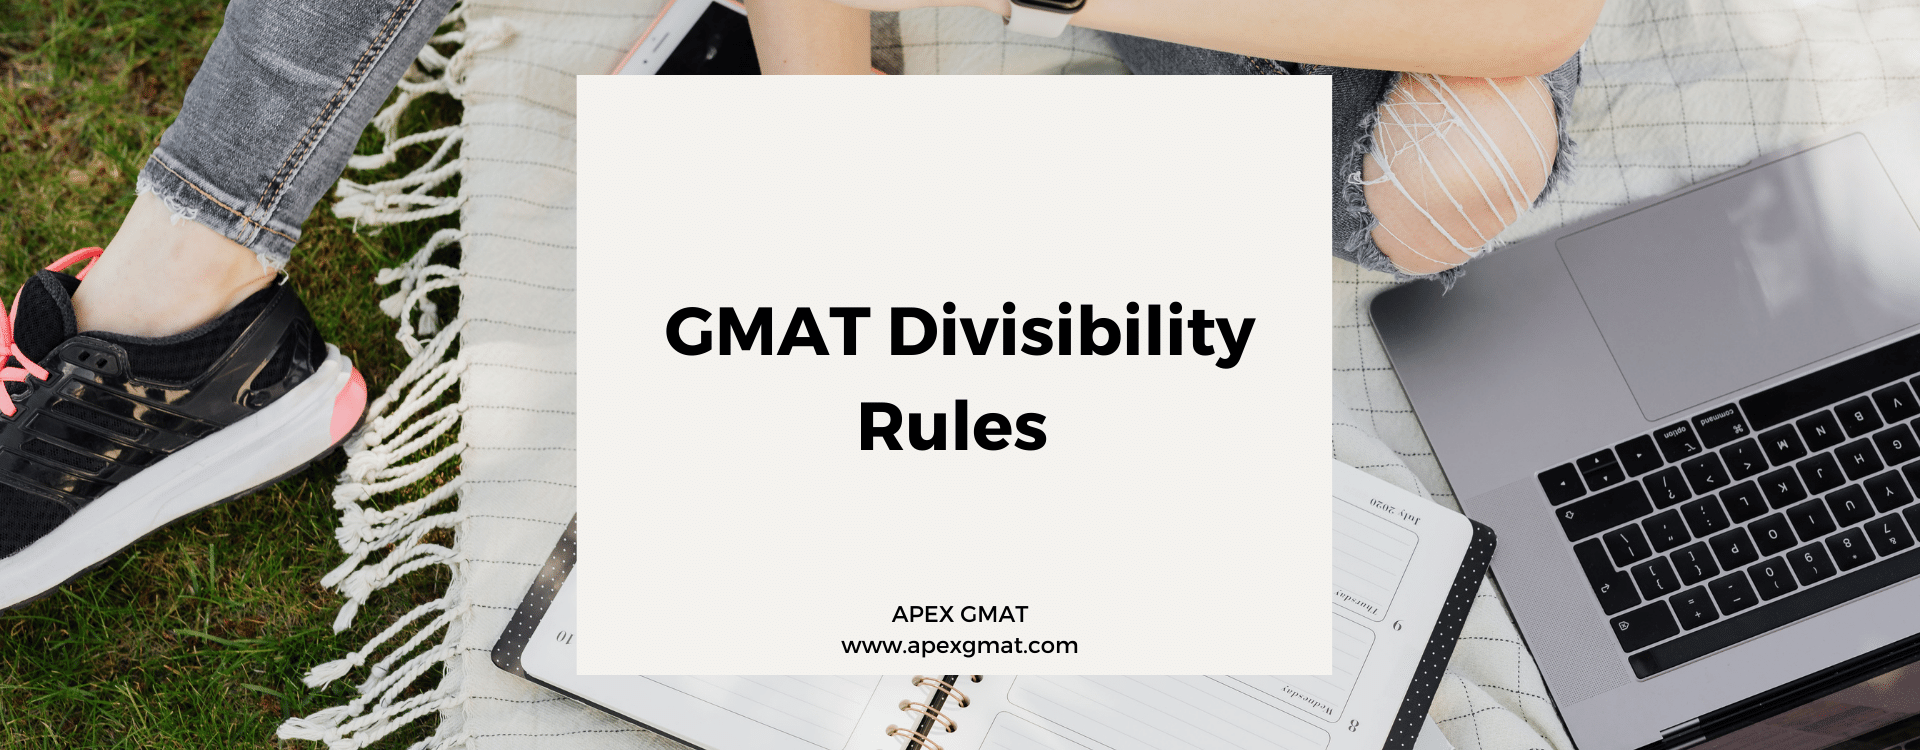 GMAT Divisibility Rules